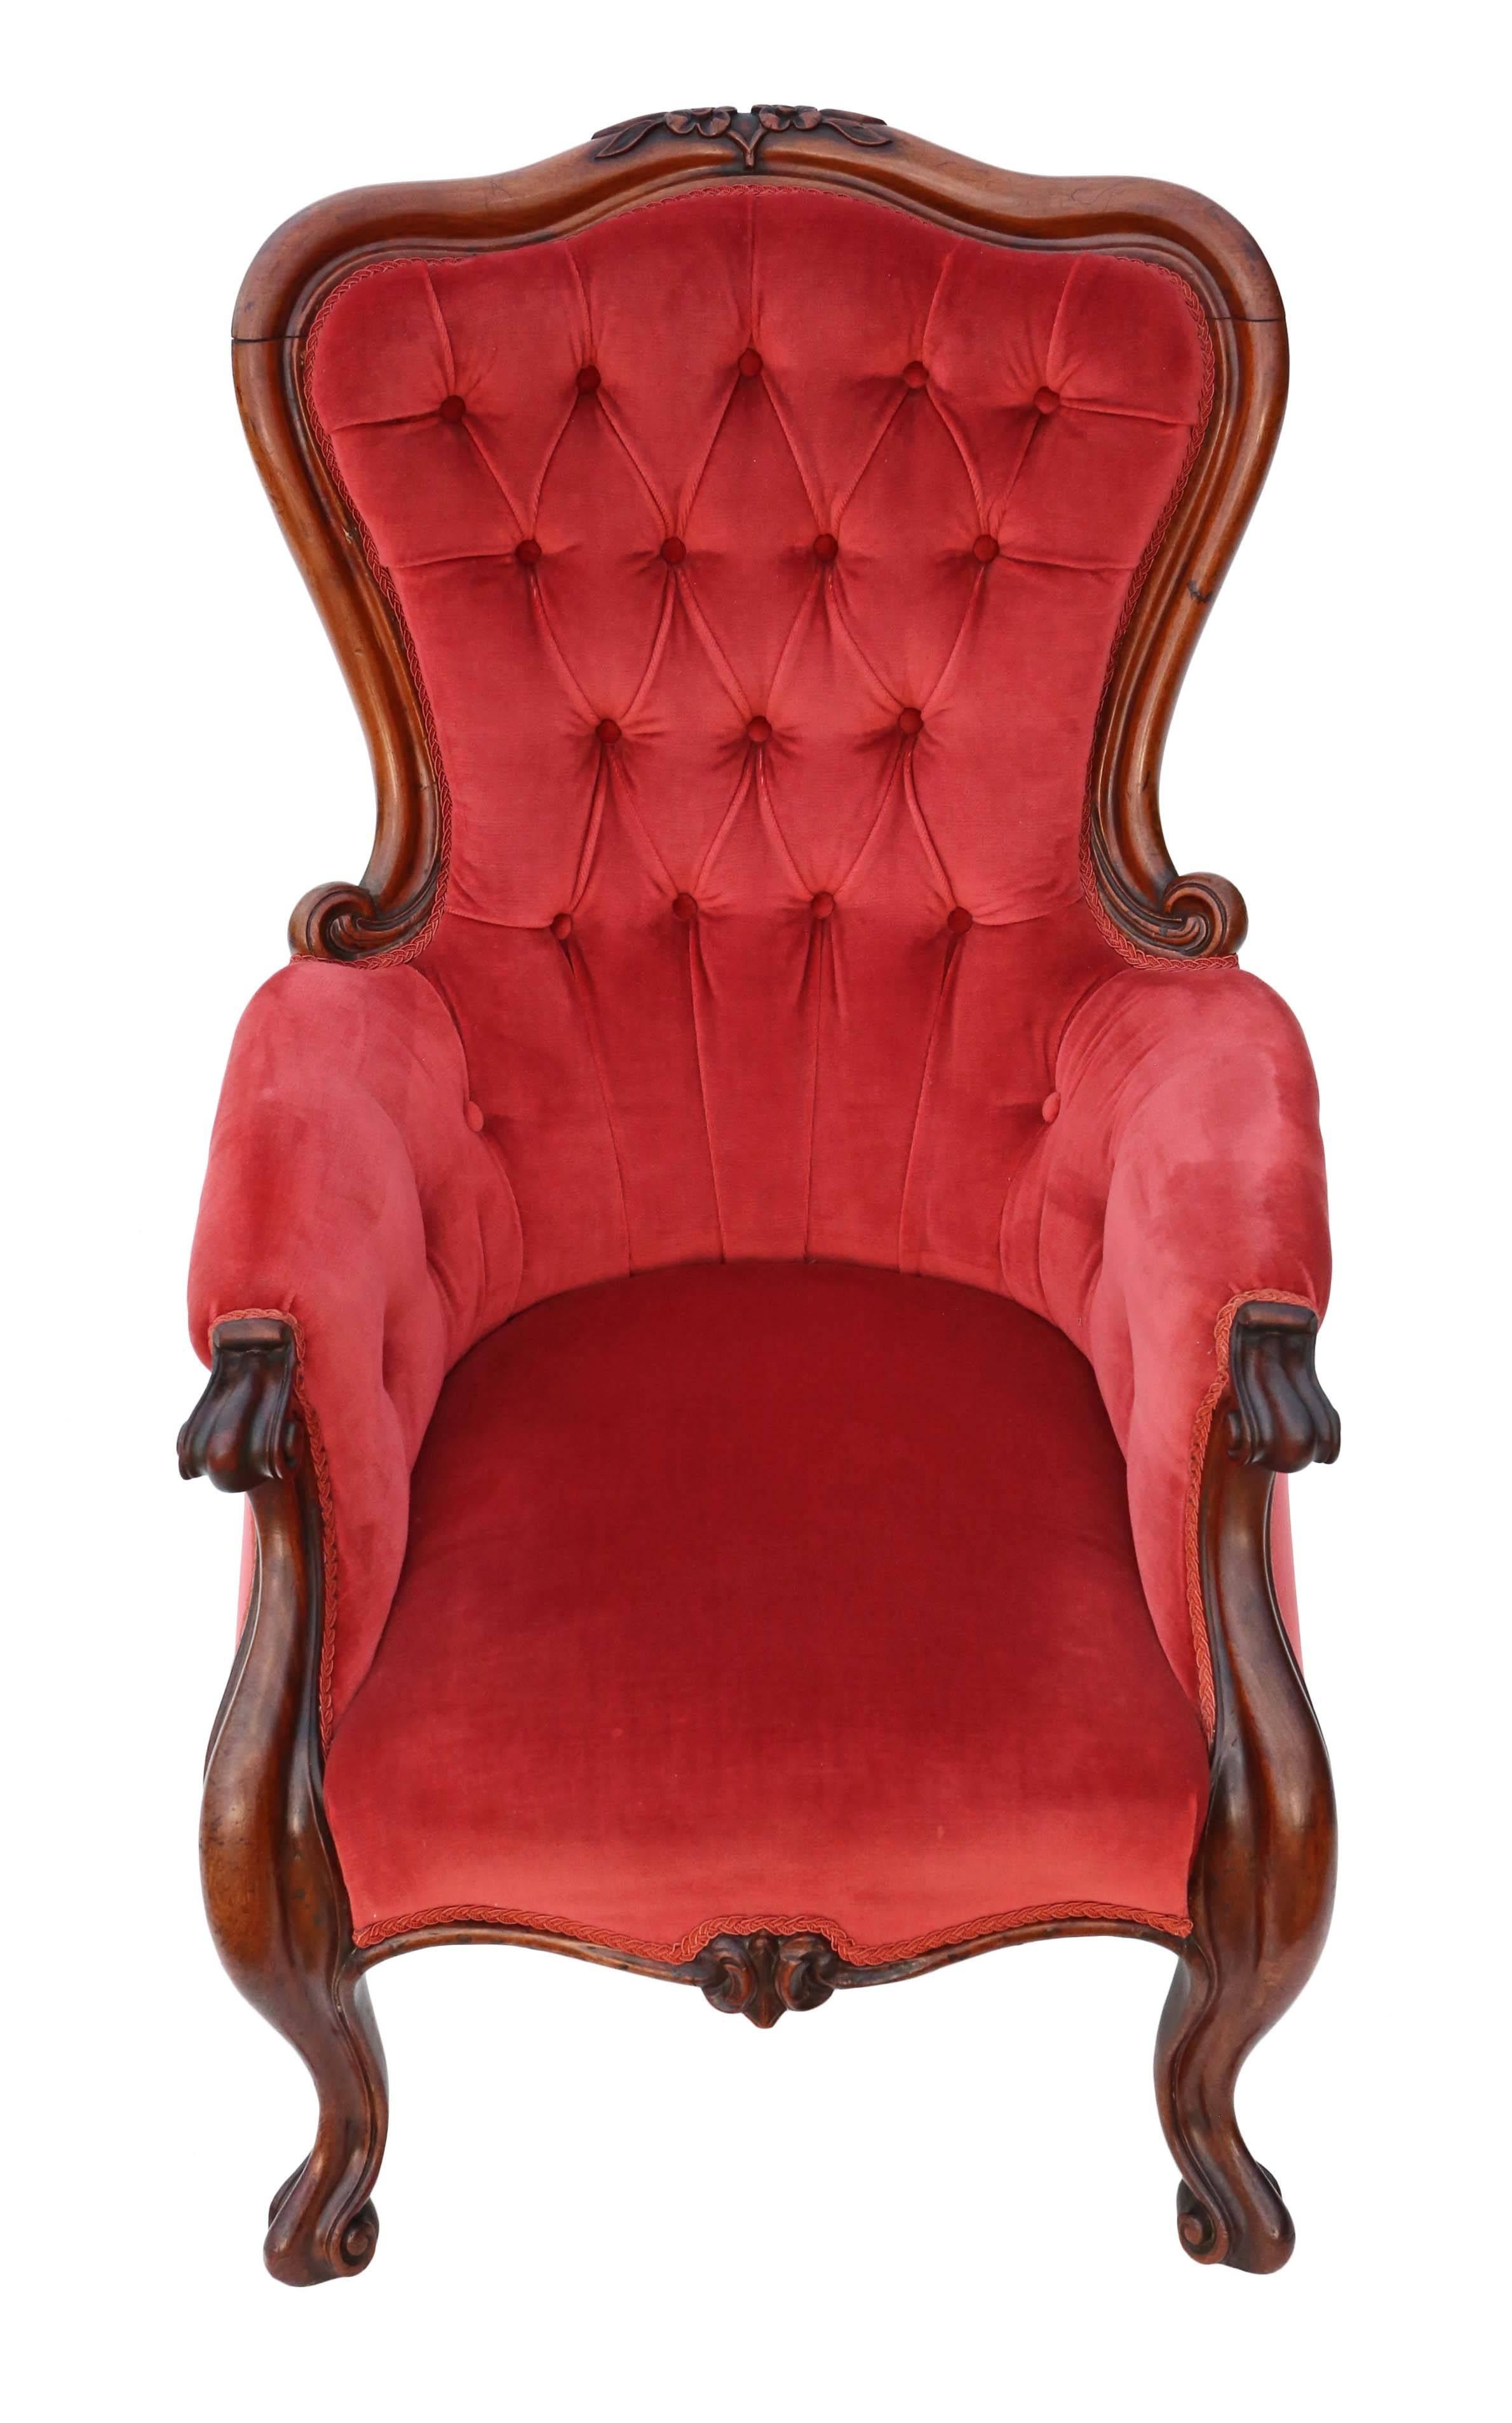 Antique quality Victorian circa 1870 mahogany slipper spoon back armchair.

Solid, no loose joints and no woodworm. Full of age, character and charm. Very decorative chair with a lovely warm mellow color. The quality red velour button back